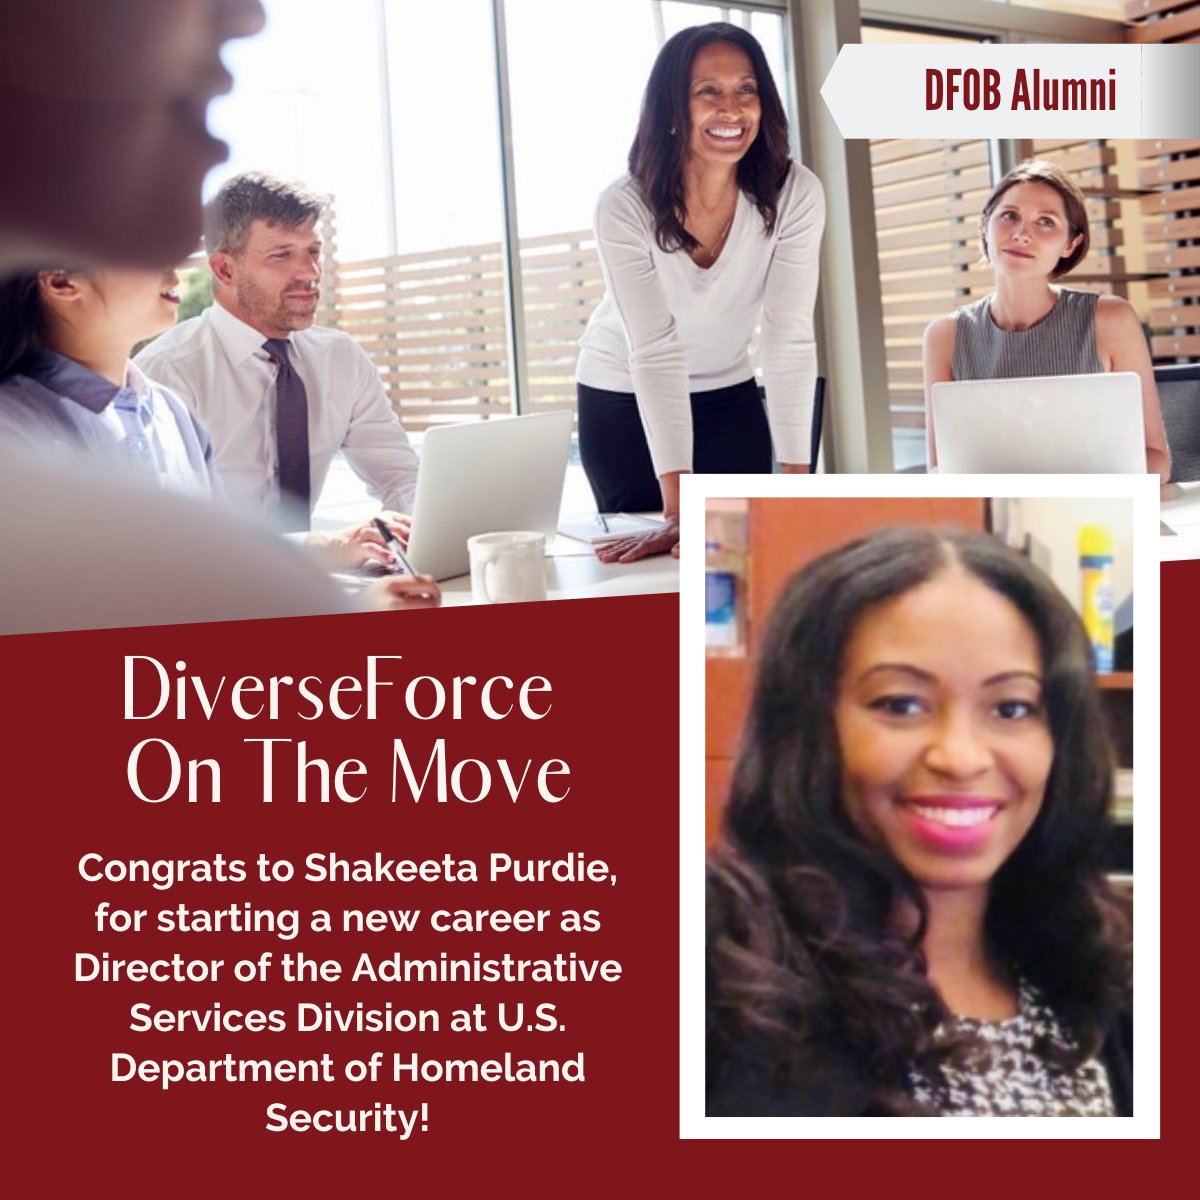 Congrats to Shakeeta Purdie, for starting a new career as Director of the Administrative Services Division at U.S. Department of Homeland Security (@DHS_US_Official)! #DiverseForce #DiverseForceOnBoards